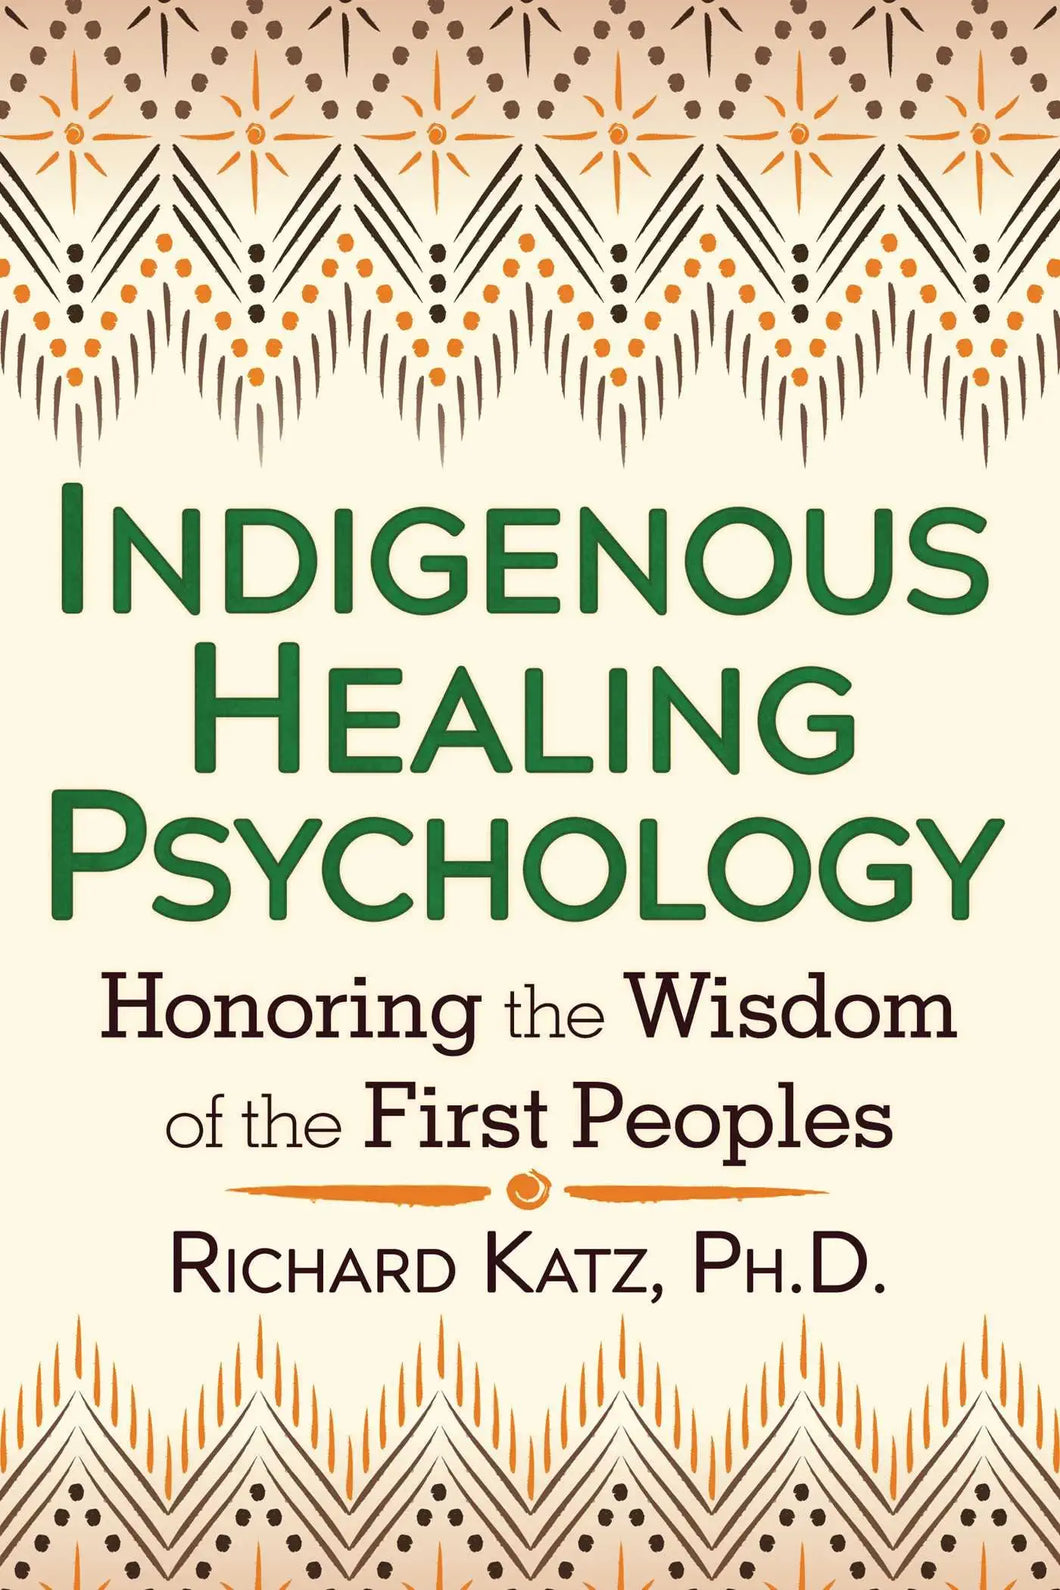 Indigenous Healing Psychology: Honoring the Wisdom of the First Peoples by Richard Katz Ph.D.